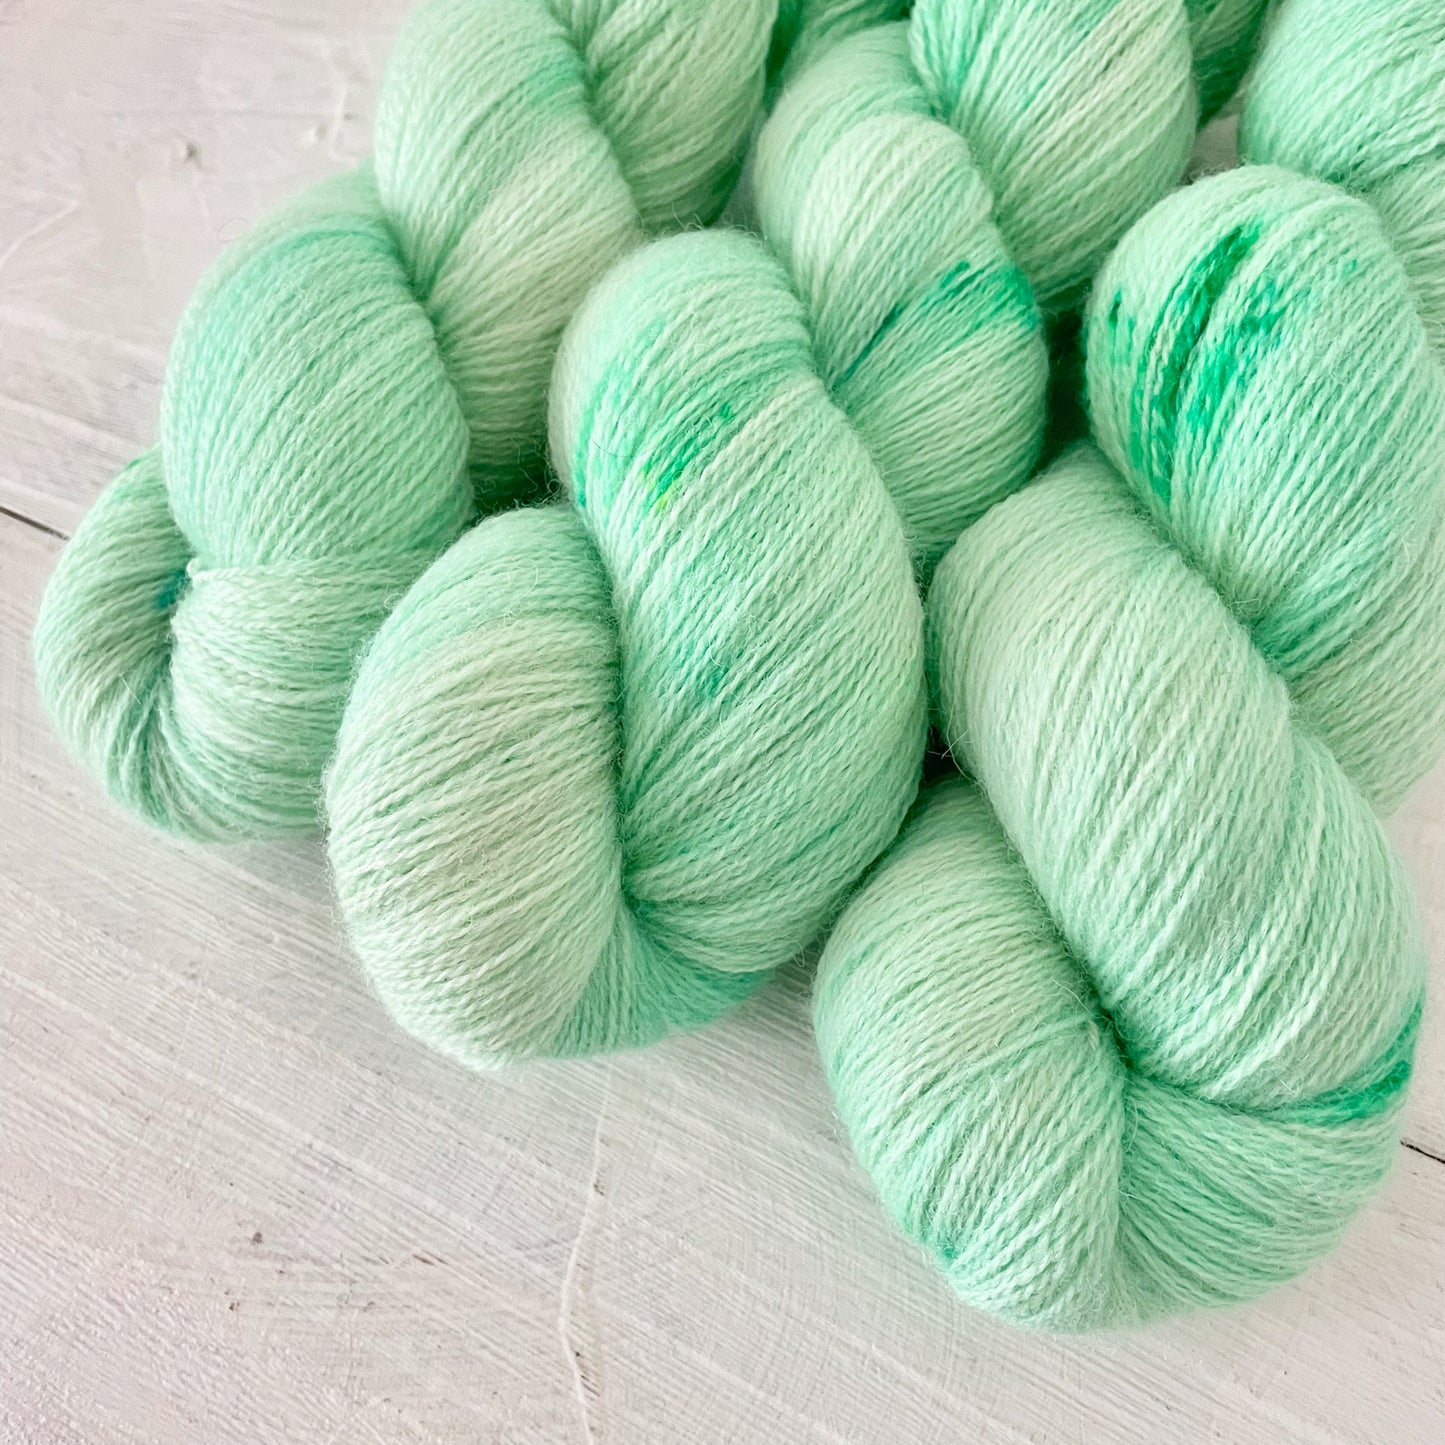 Hand-dyed yarn No.113 lace "Frühling übers Jahr"